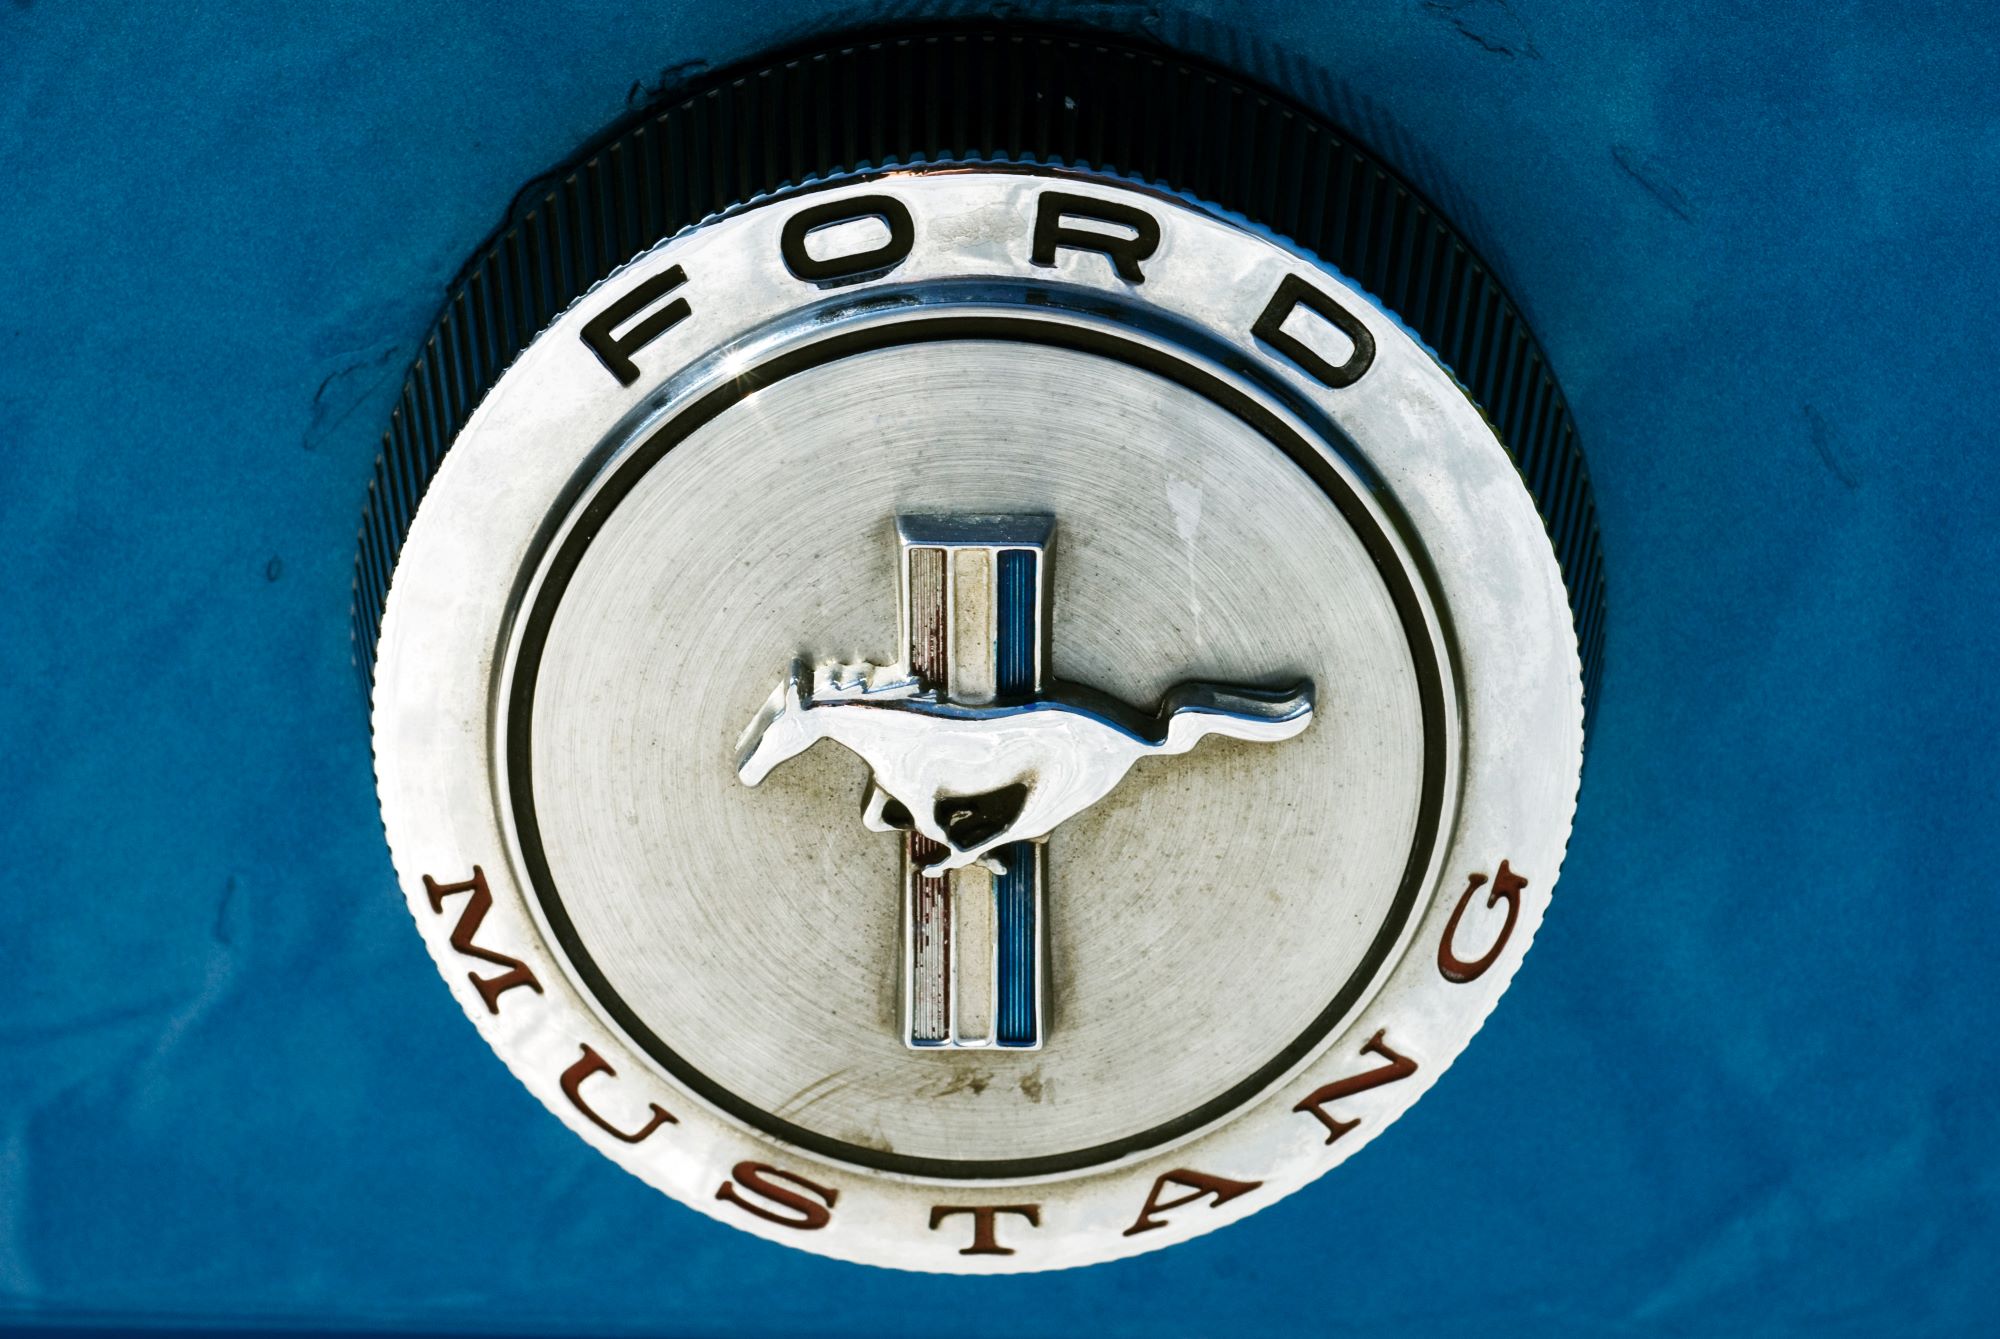 A silver Ford Mustang logo on a blue car.